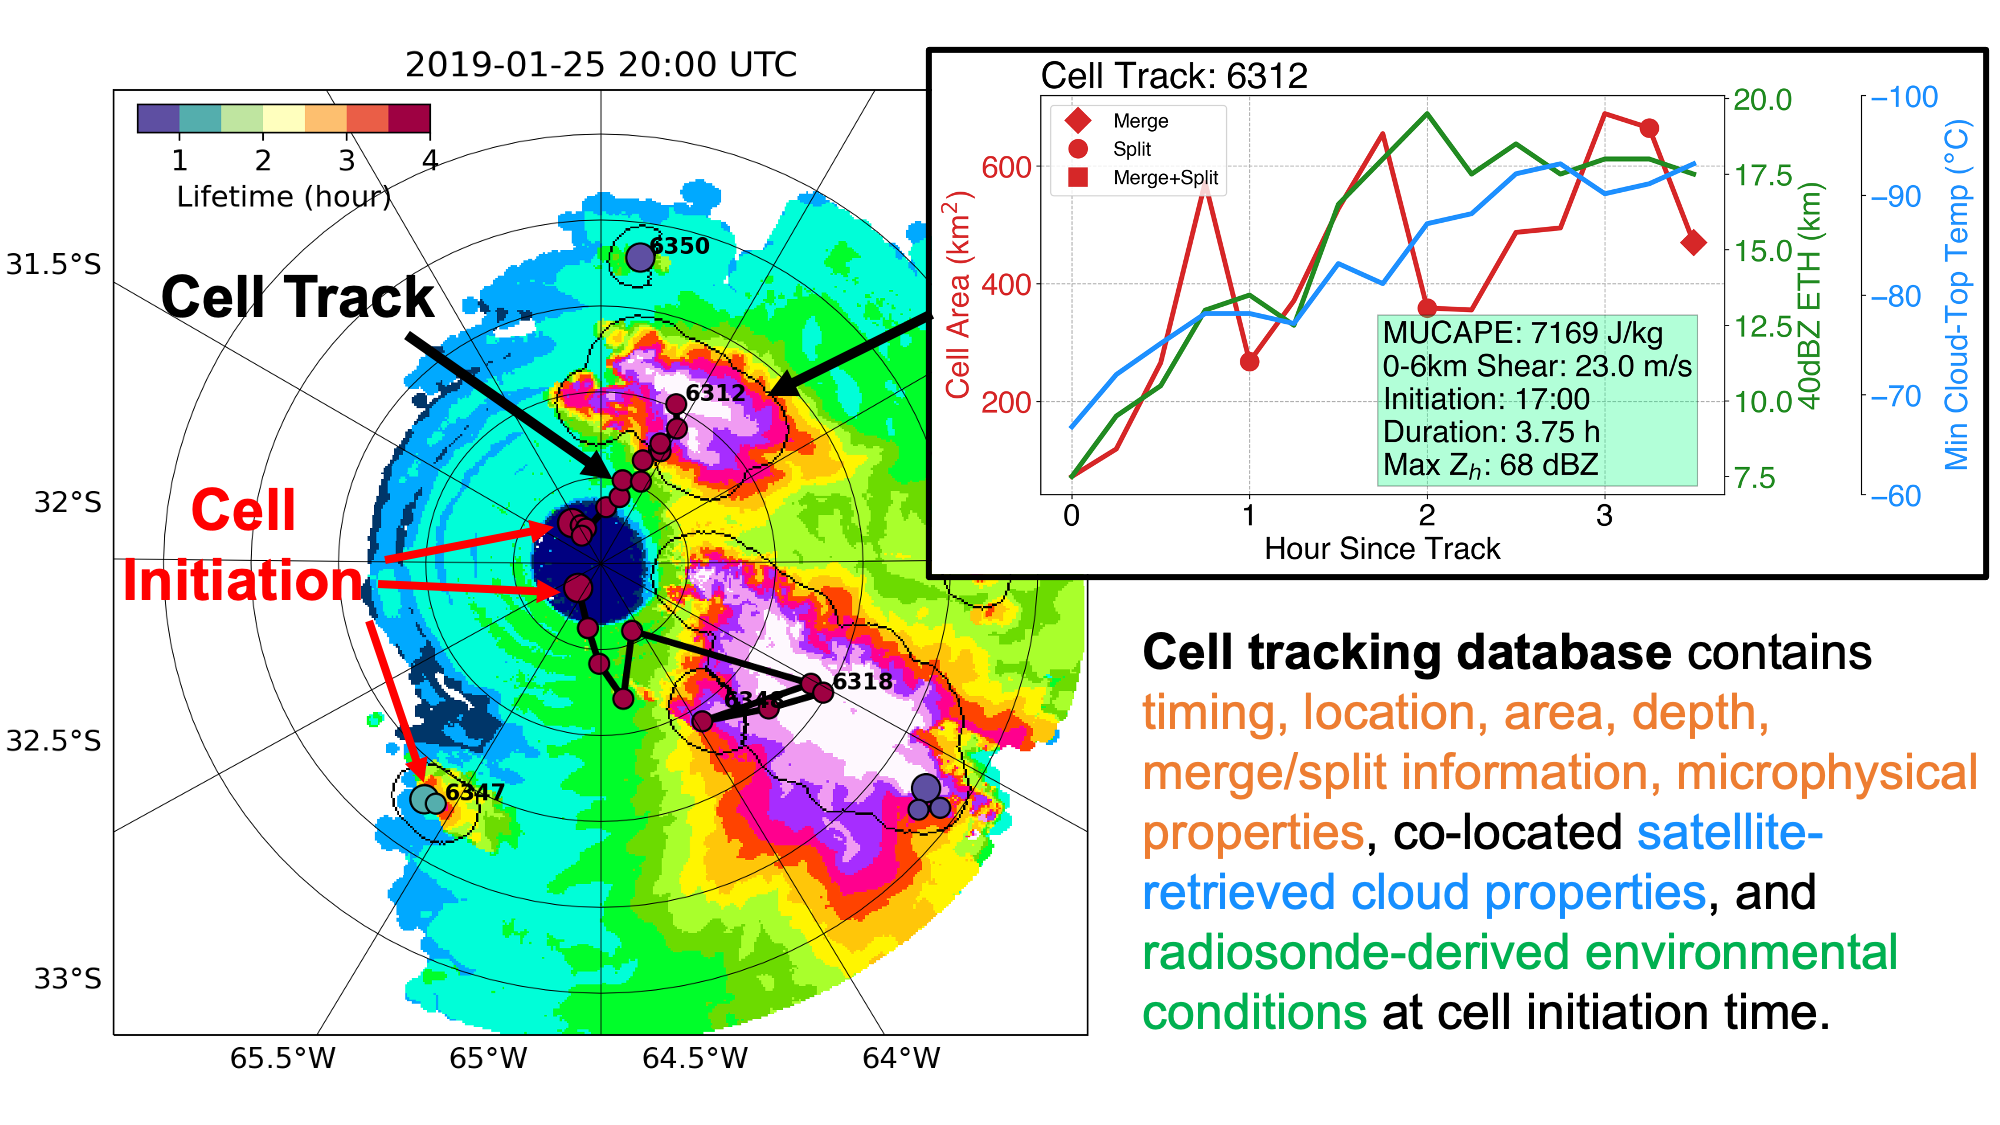 The left image shows cell tracks 6312, 6318, 6346, 6347, and 6350. The inset for cell area 6312 shows MUCAPE (7169 J/kg), 0-6km shear (23.0 m/s), initiation (17:00), duration (3.75 h), and max zh (68 dBZ).